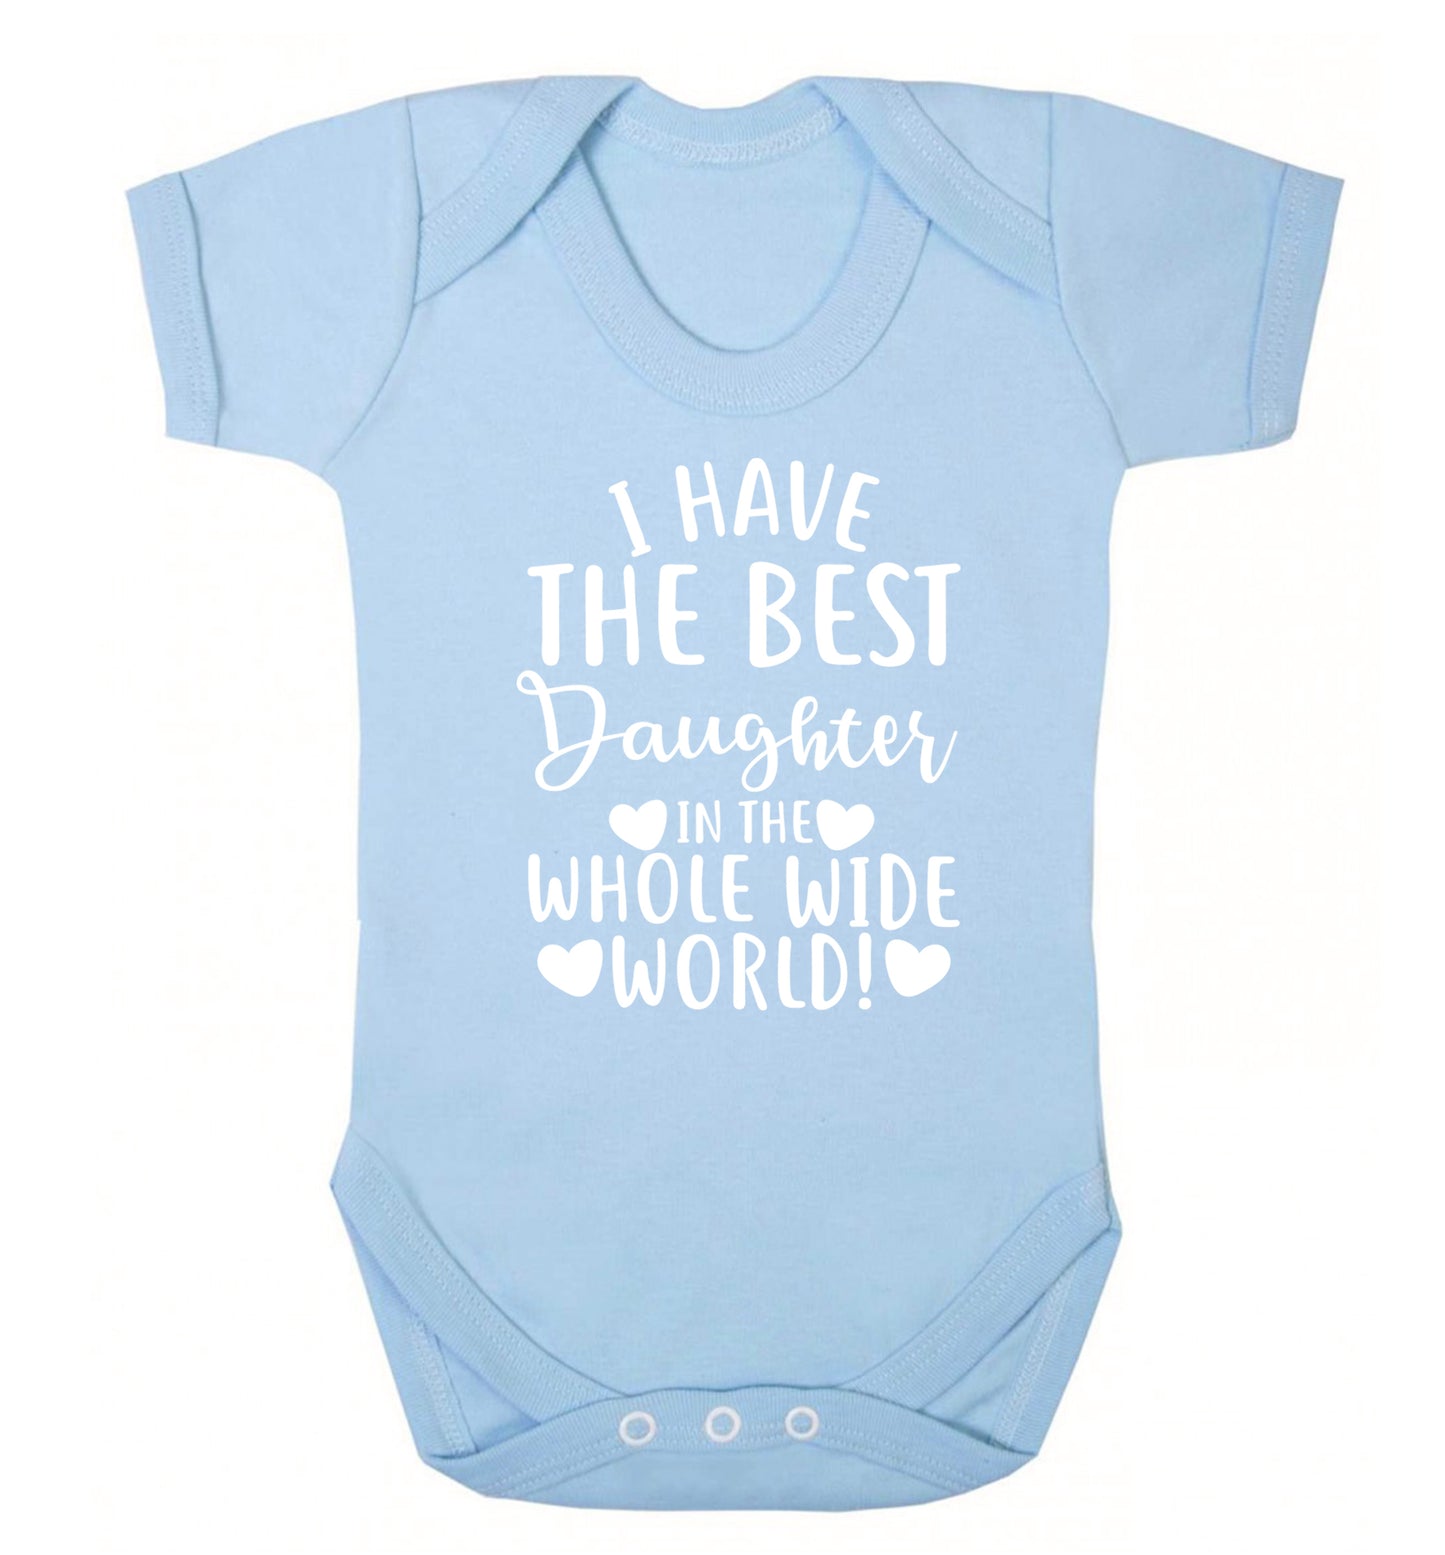 I have the best daughter in the whole wide world! Baby Vest pale blue 18-24 months